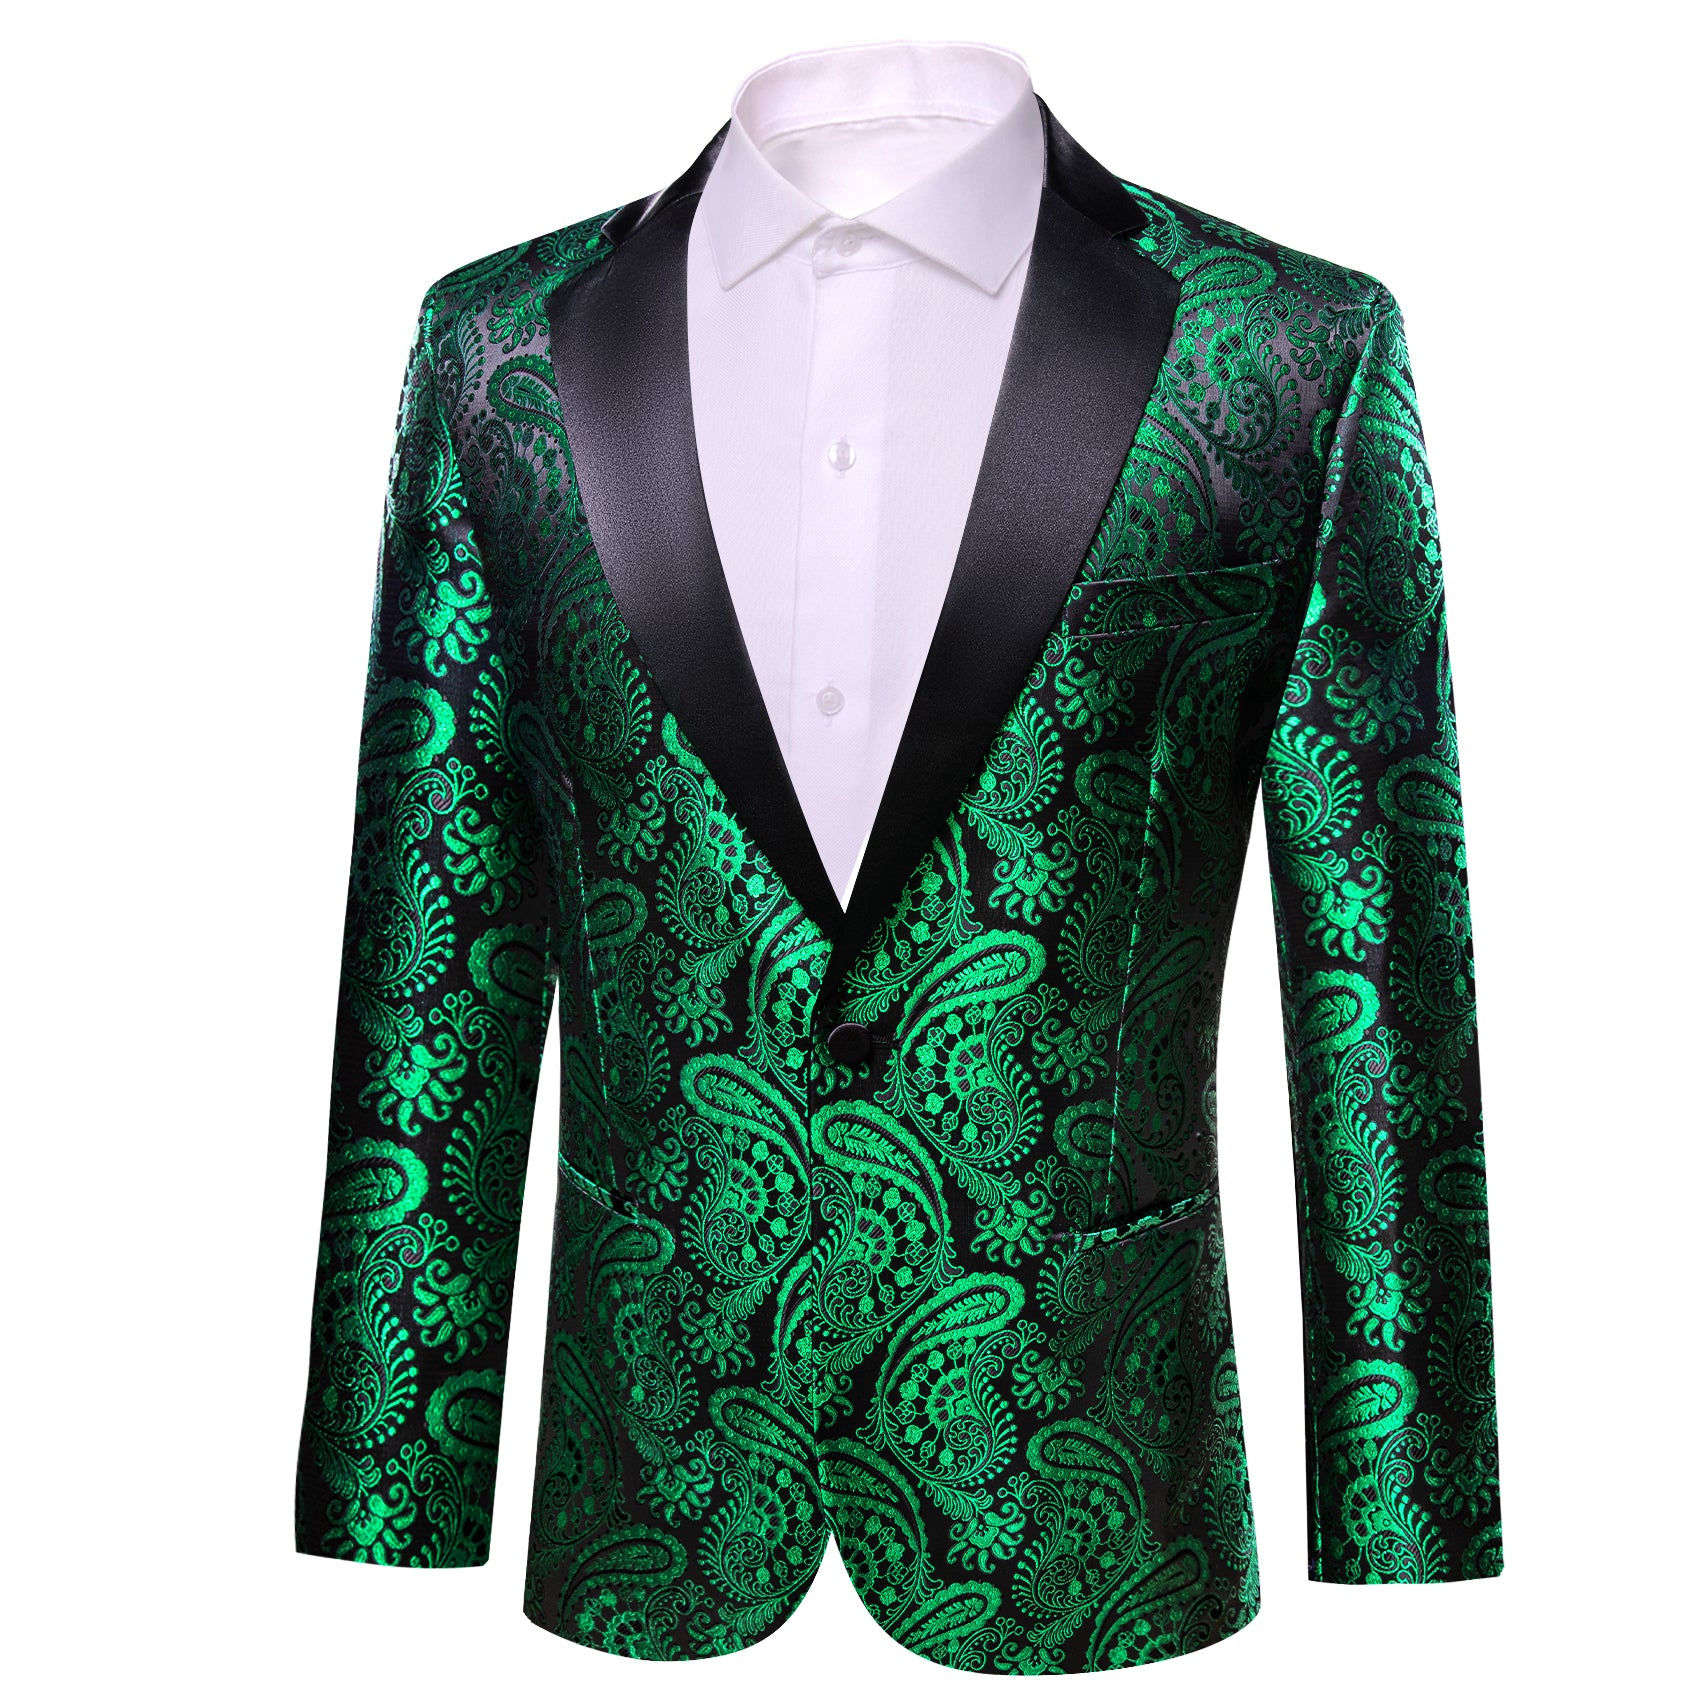 Barry.wang Men's Suit Green Gold Paisley Notched Collar Suit Jacket